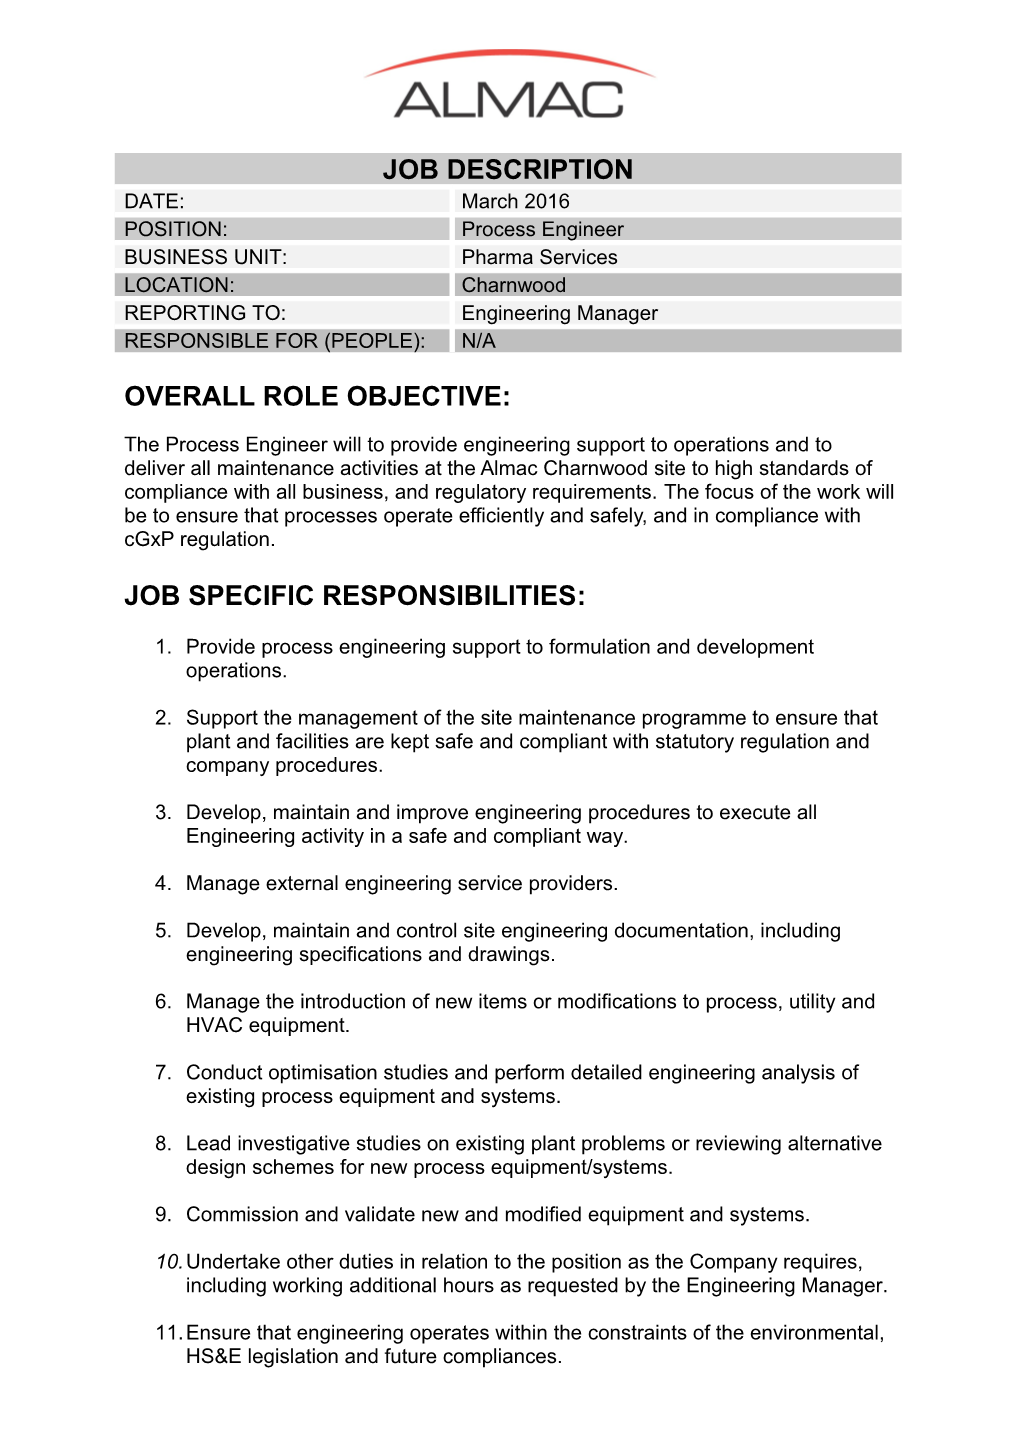 Overall Role Objective s6